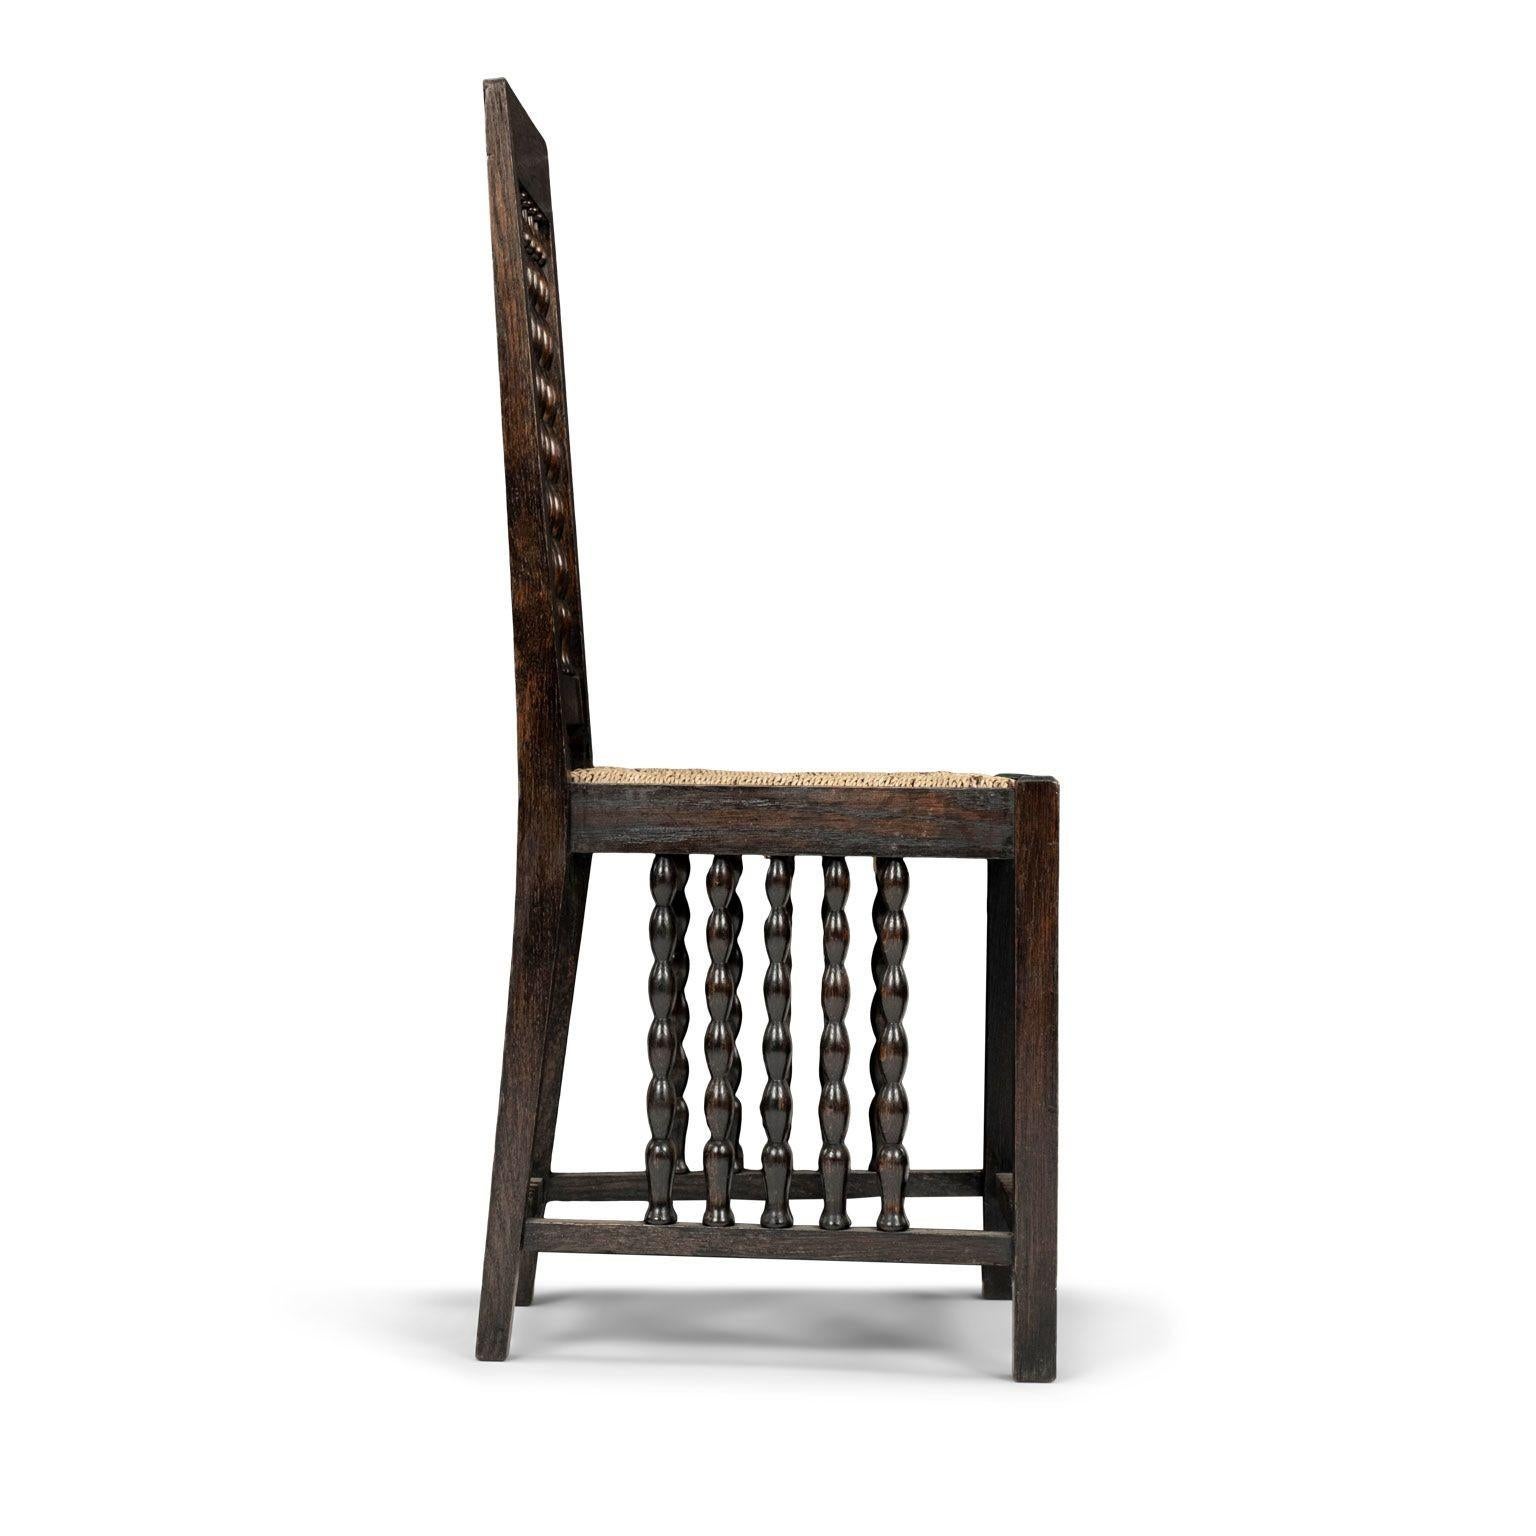 Early modern Jugendstil side chair by Heinrich Vogeler, circa 1910, Germany. Frame carved from blackened oak, square legs (square back legs taper), rushed trapezoidal seat, openwork beaded (bobbin) motif decorates backrest and space between seat and